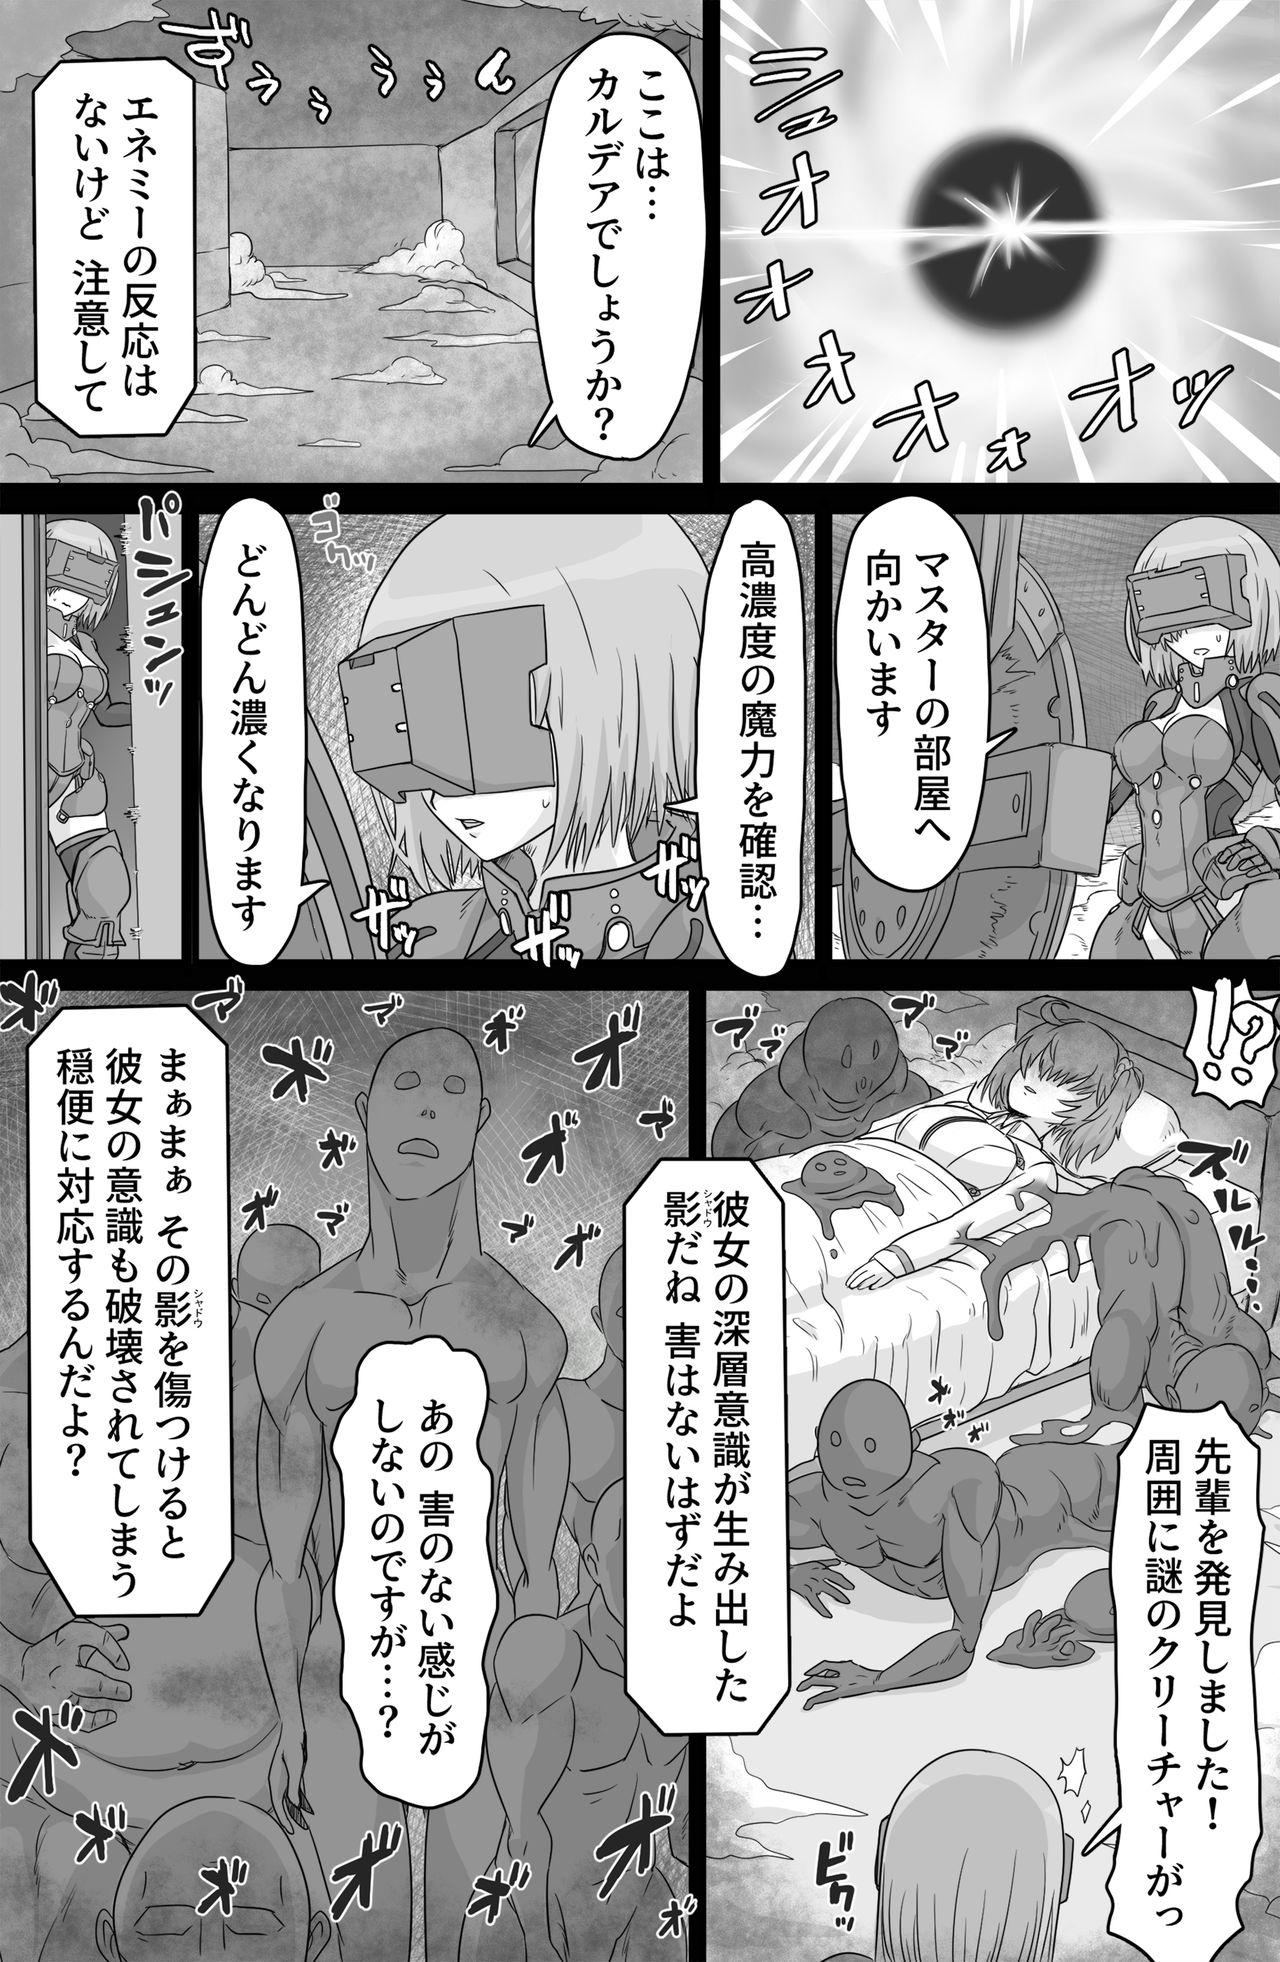 Amatuer Sex Shadow Bind - Fate grand order Hardcore Gay - Page 3